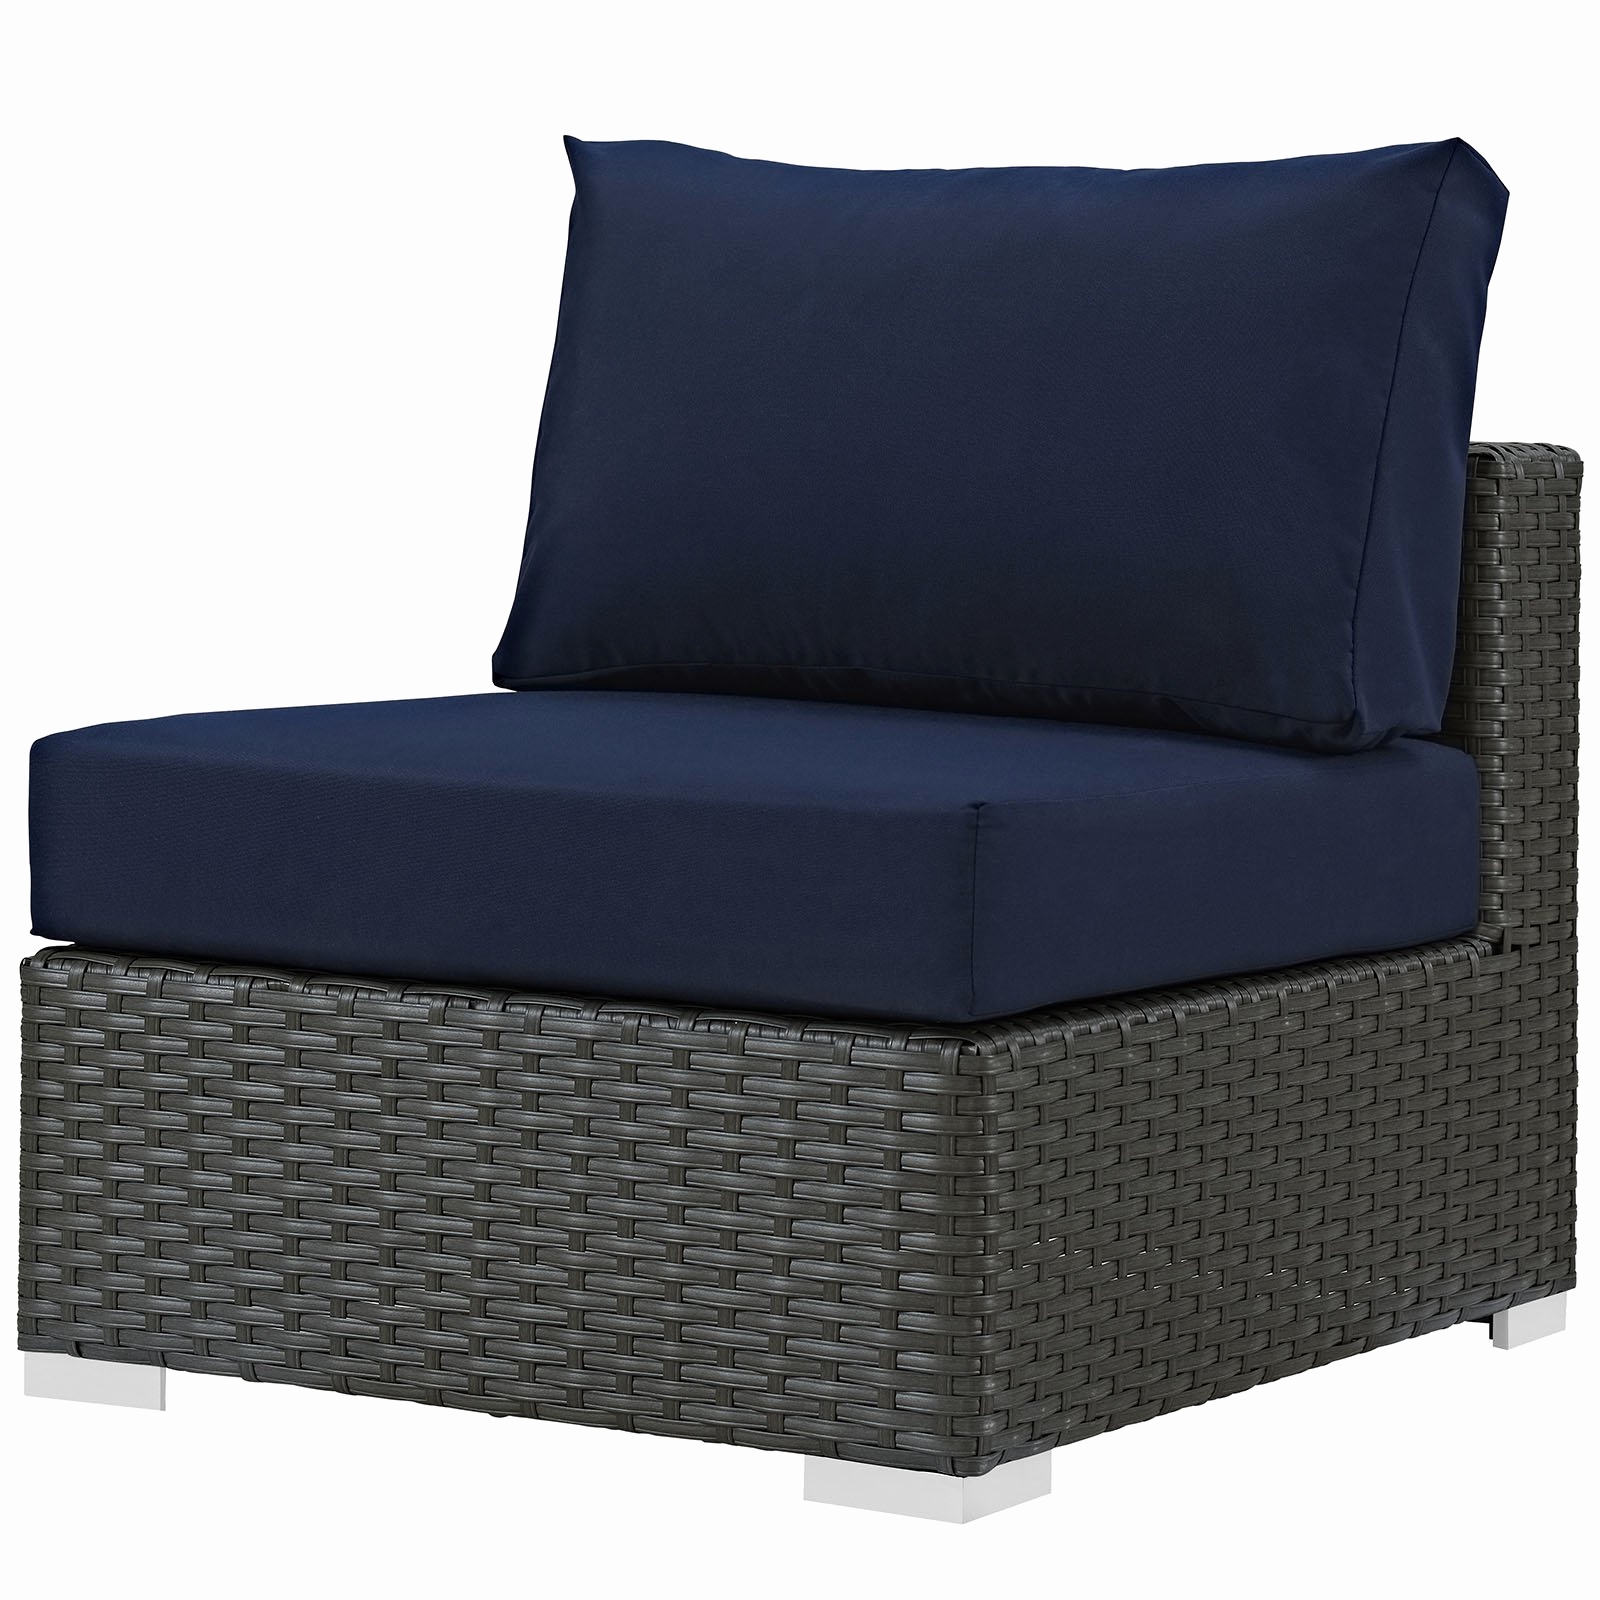 Deep Seating Replacement Cushions For Outdoor Furniture For Perfect Patio Decorations  Roy Home 